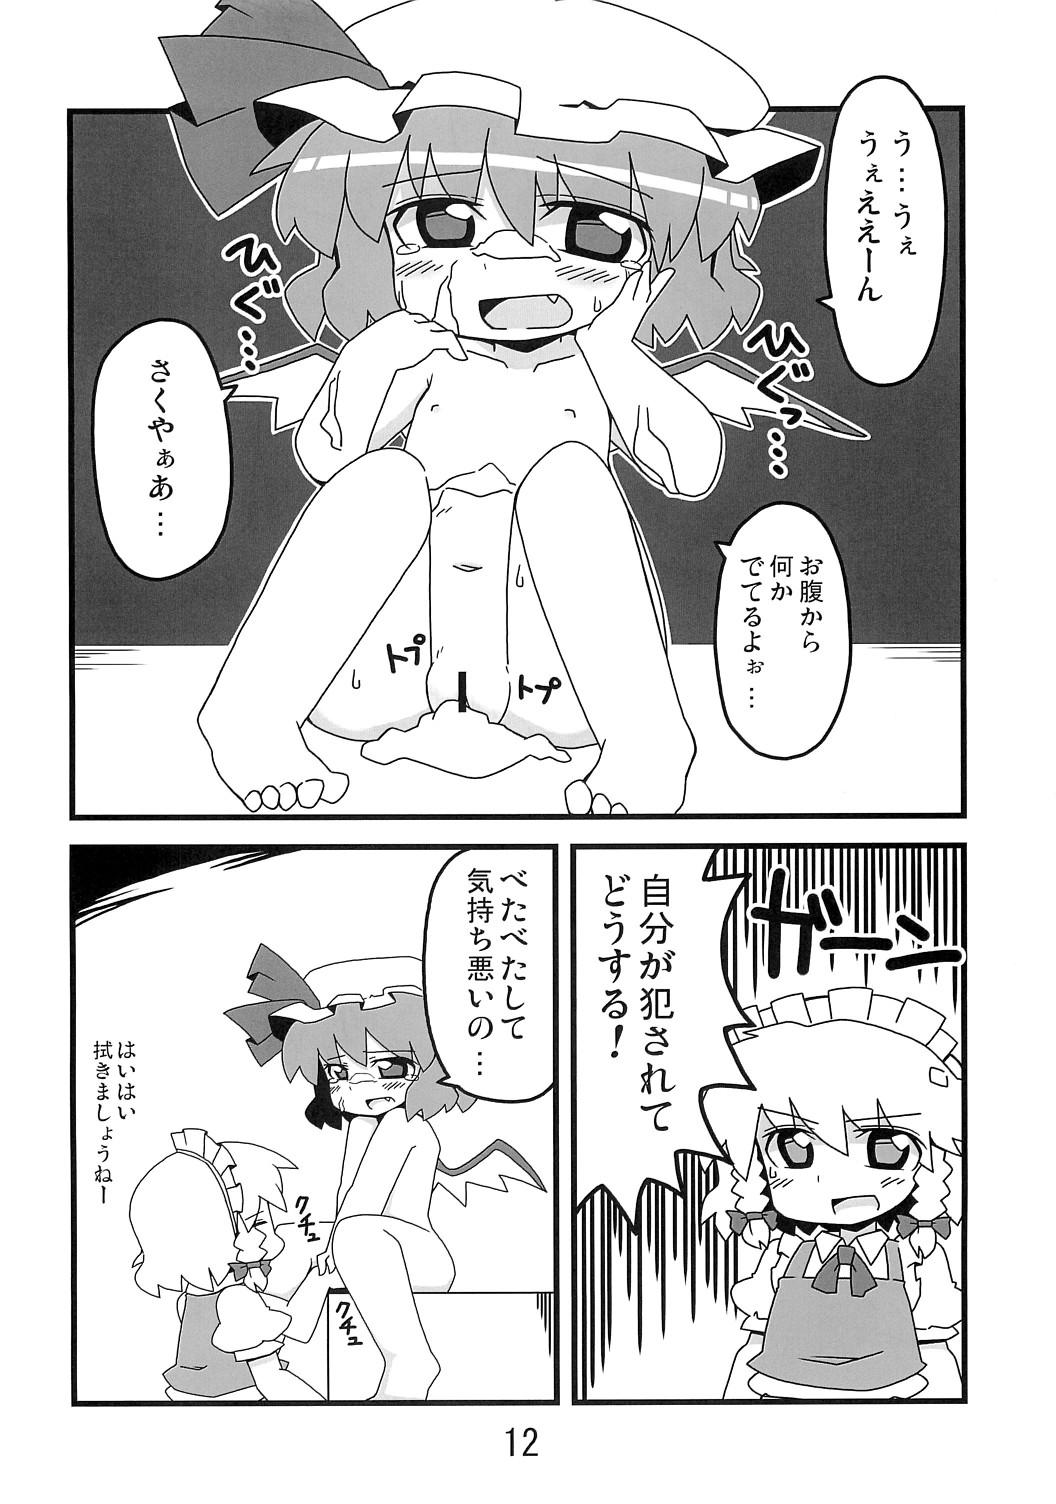 Teenager 東方豊年祭 - Touhou project Tamil - Page 11